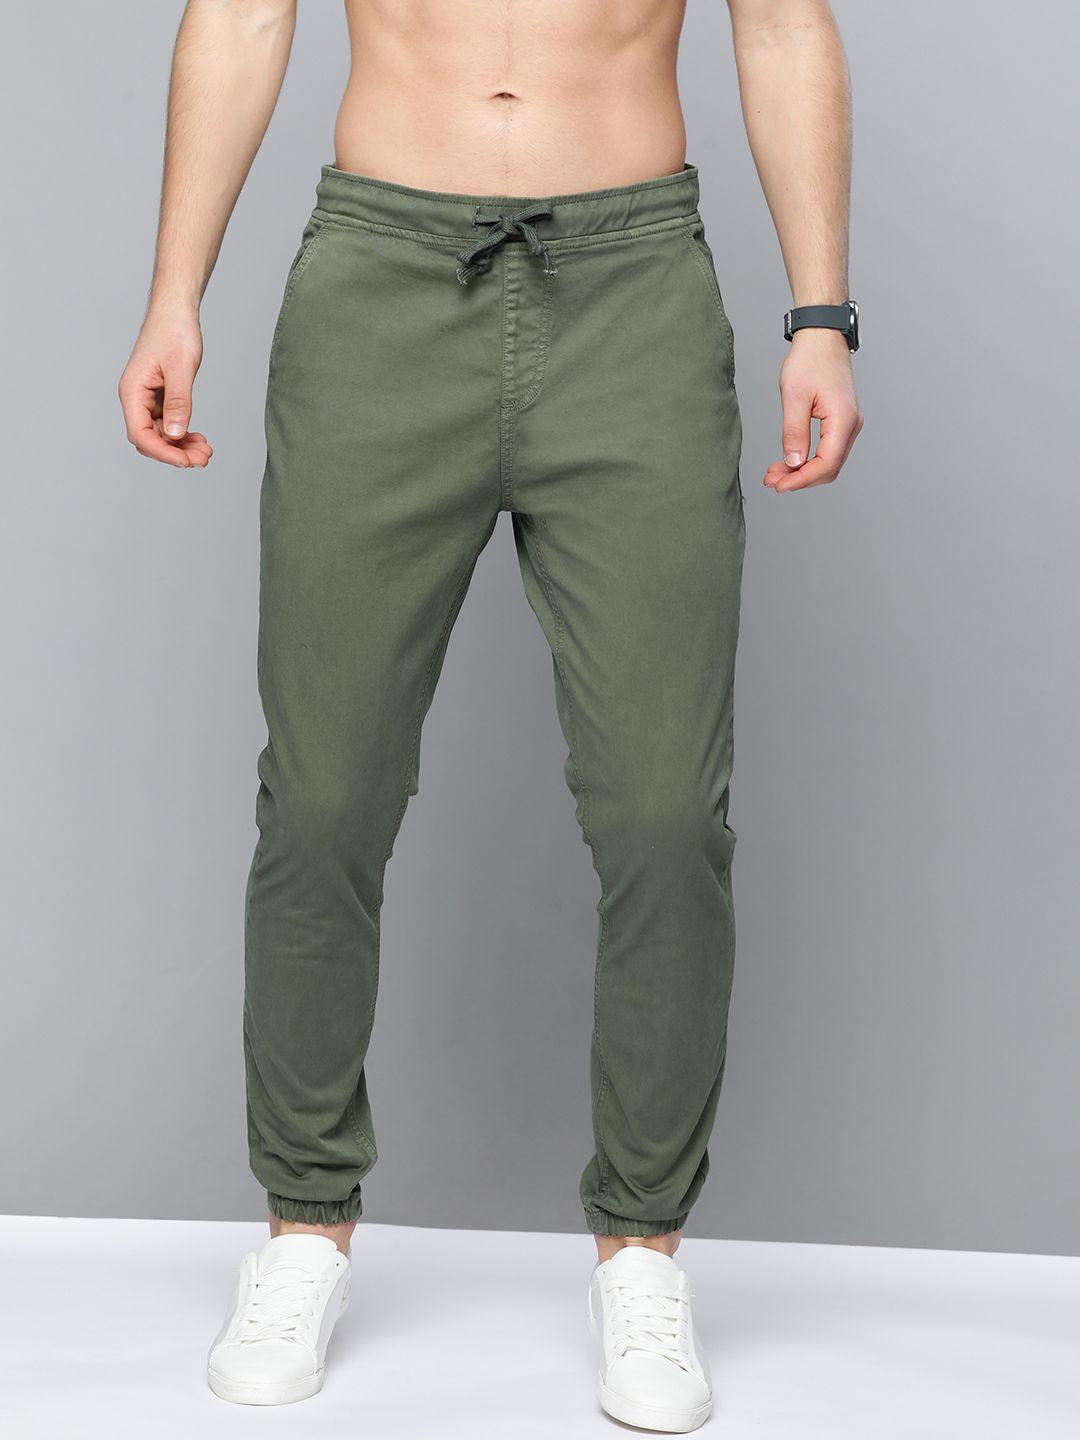 here&now-men-olive-green-regular-fit-solid-joggers